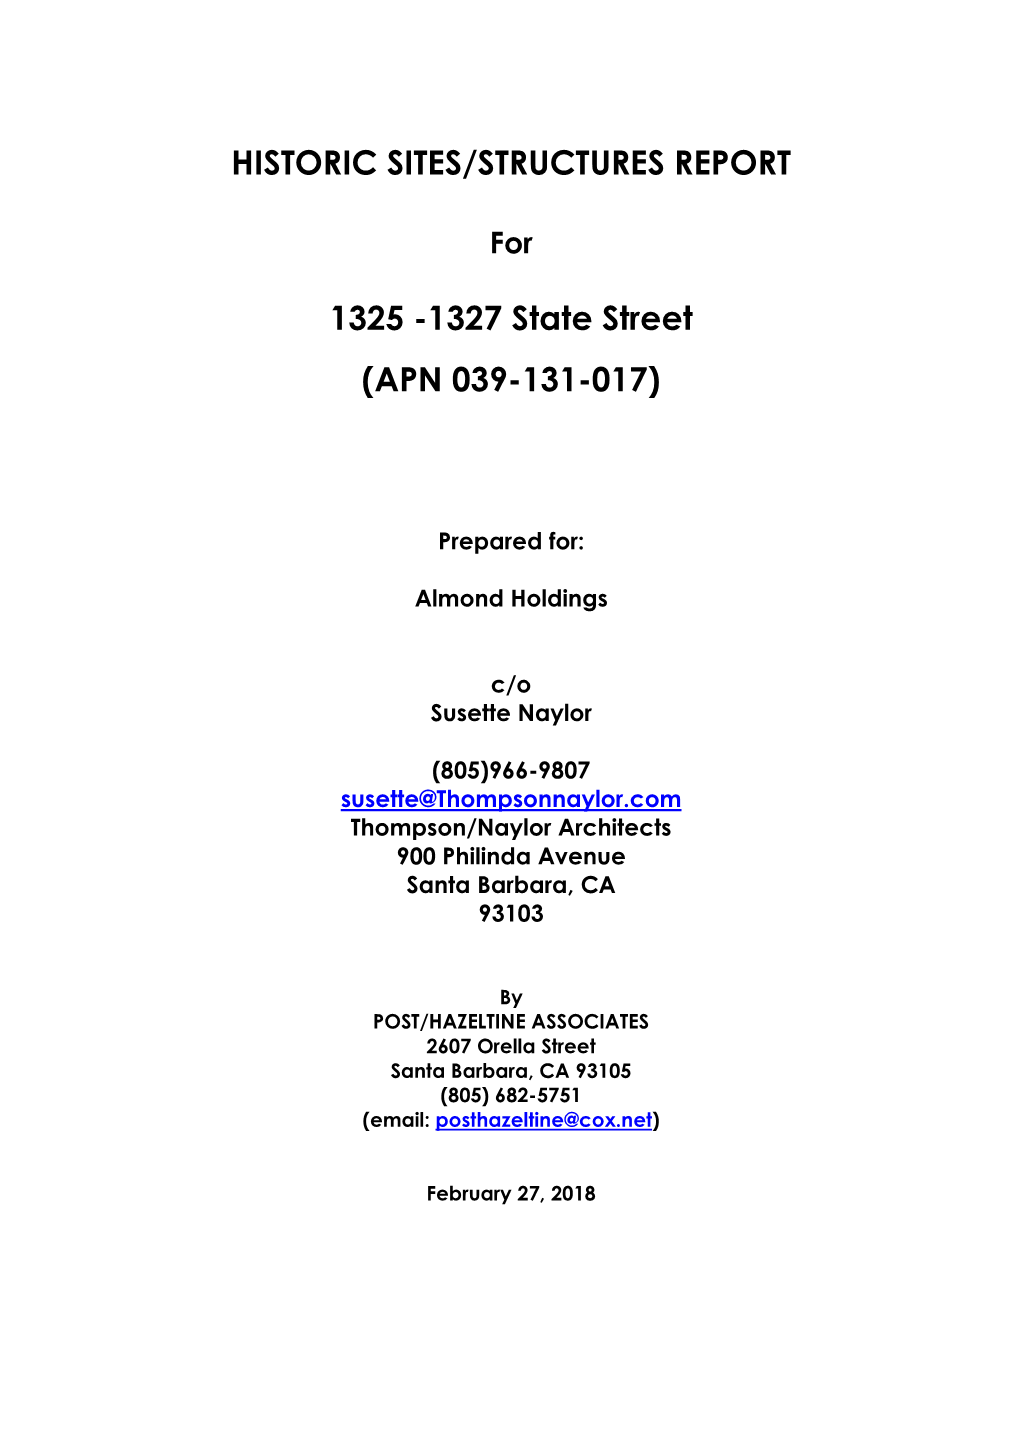 HISTORIC SITES/STRUCTURES REPORT 1325 -1327 State Street